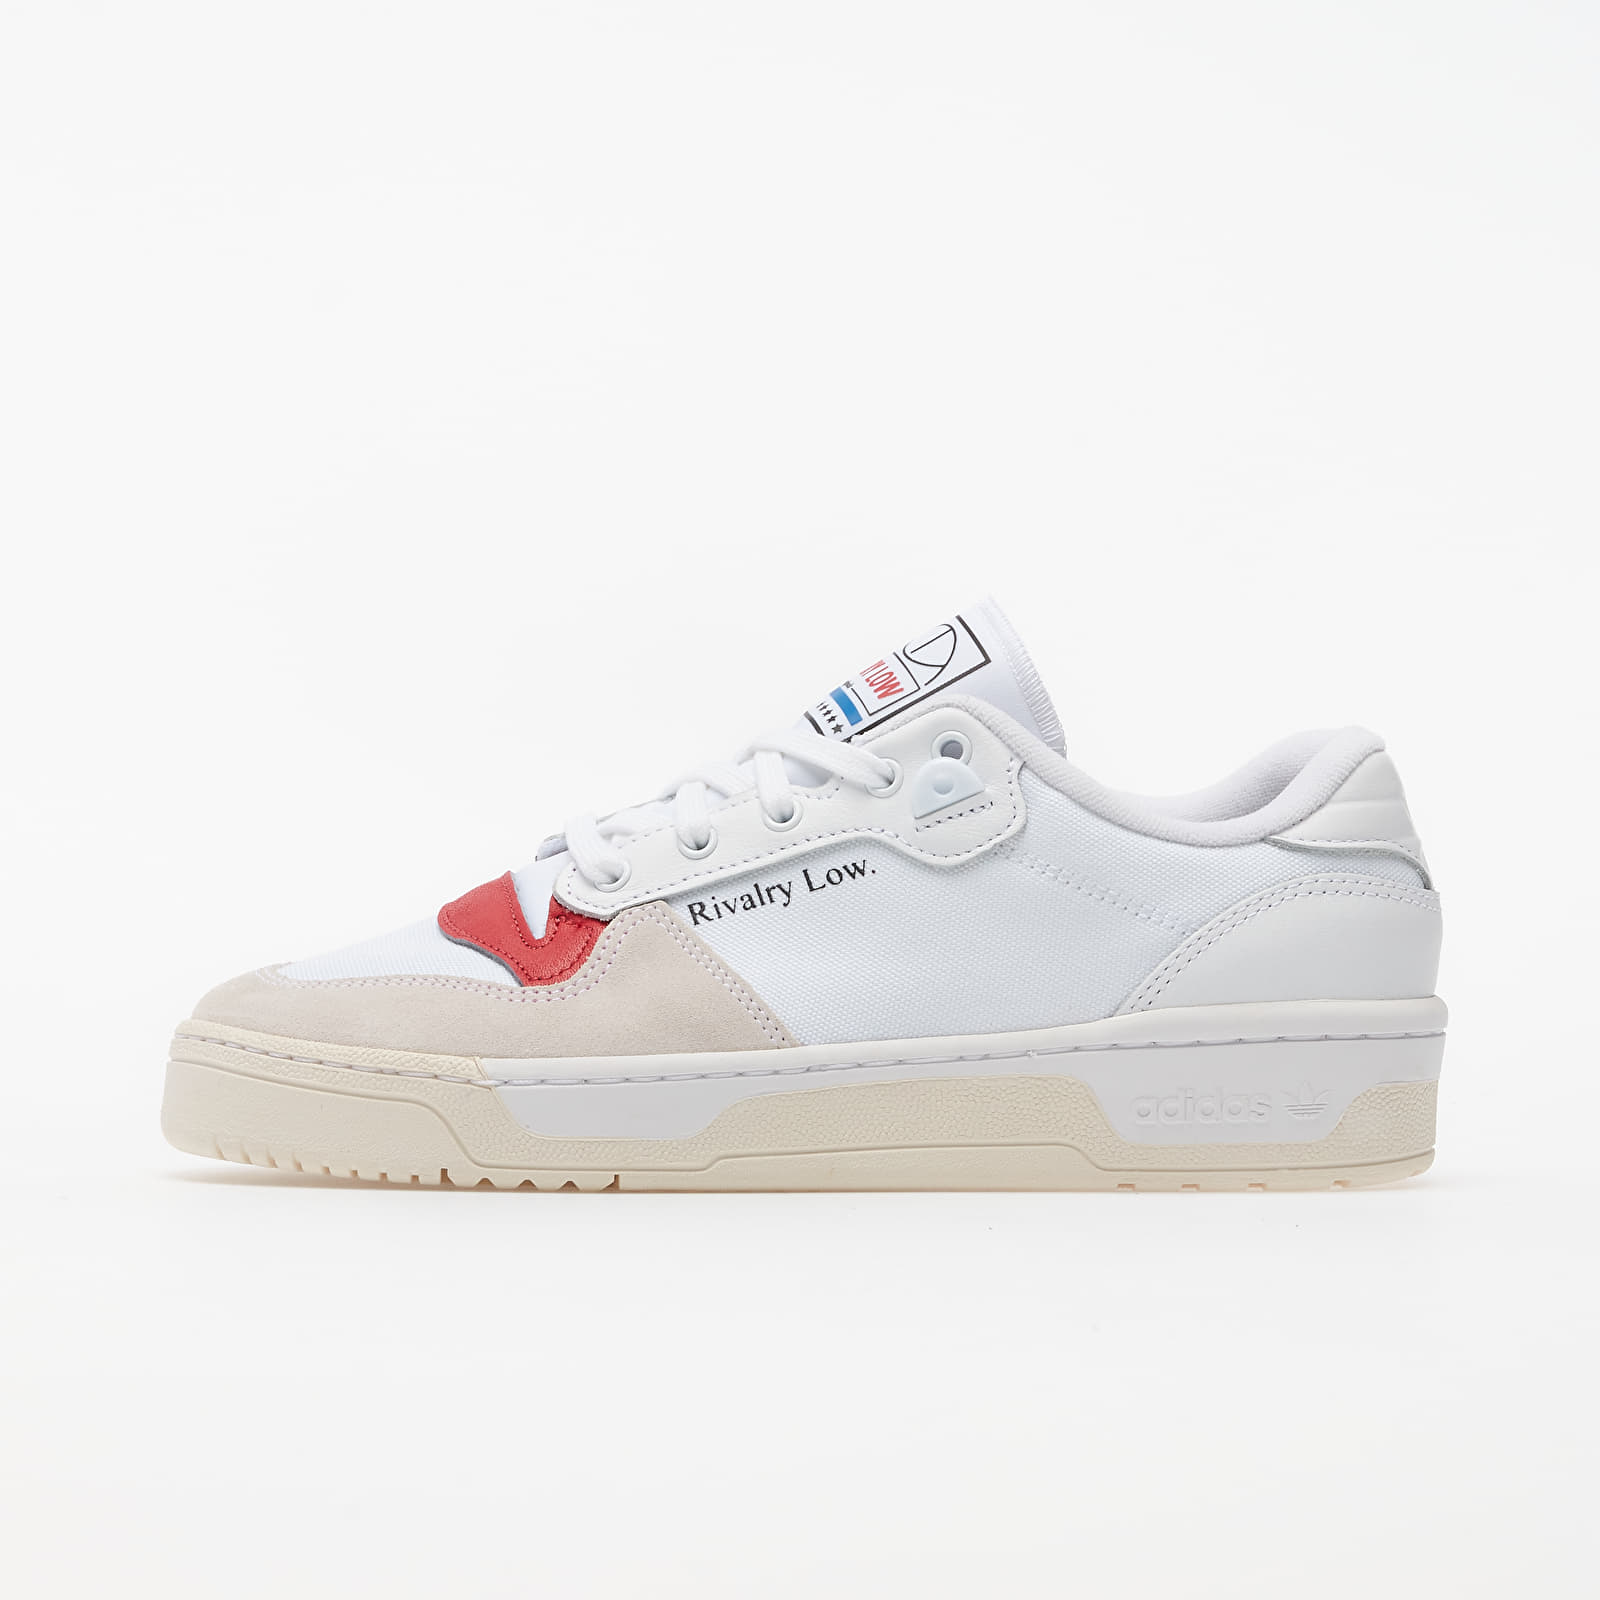 Männer adidas Rivalry Low Ftw White/ Core White/ Glow Red